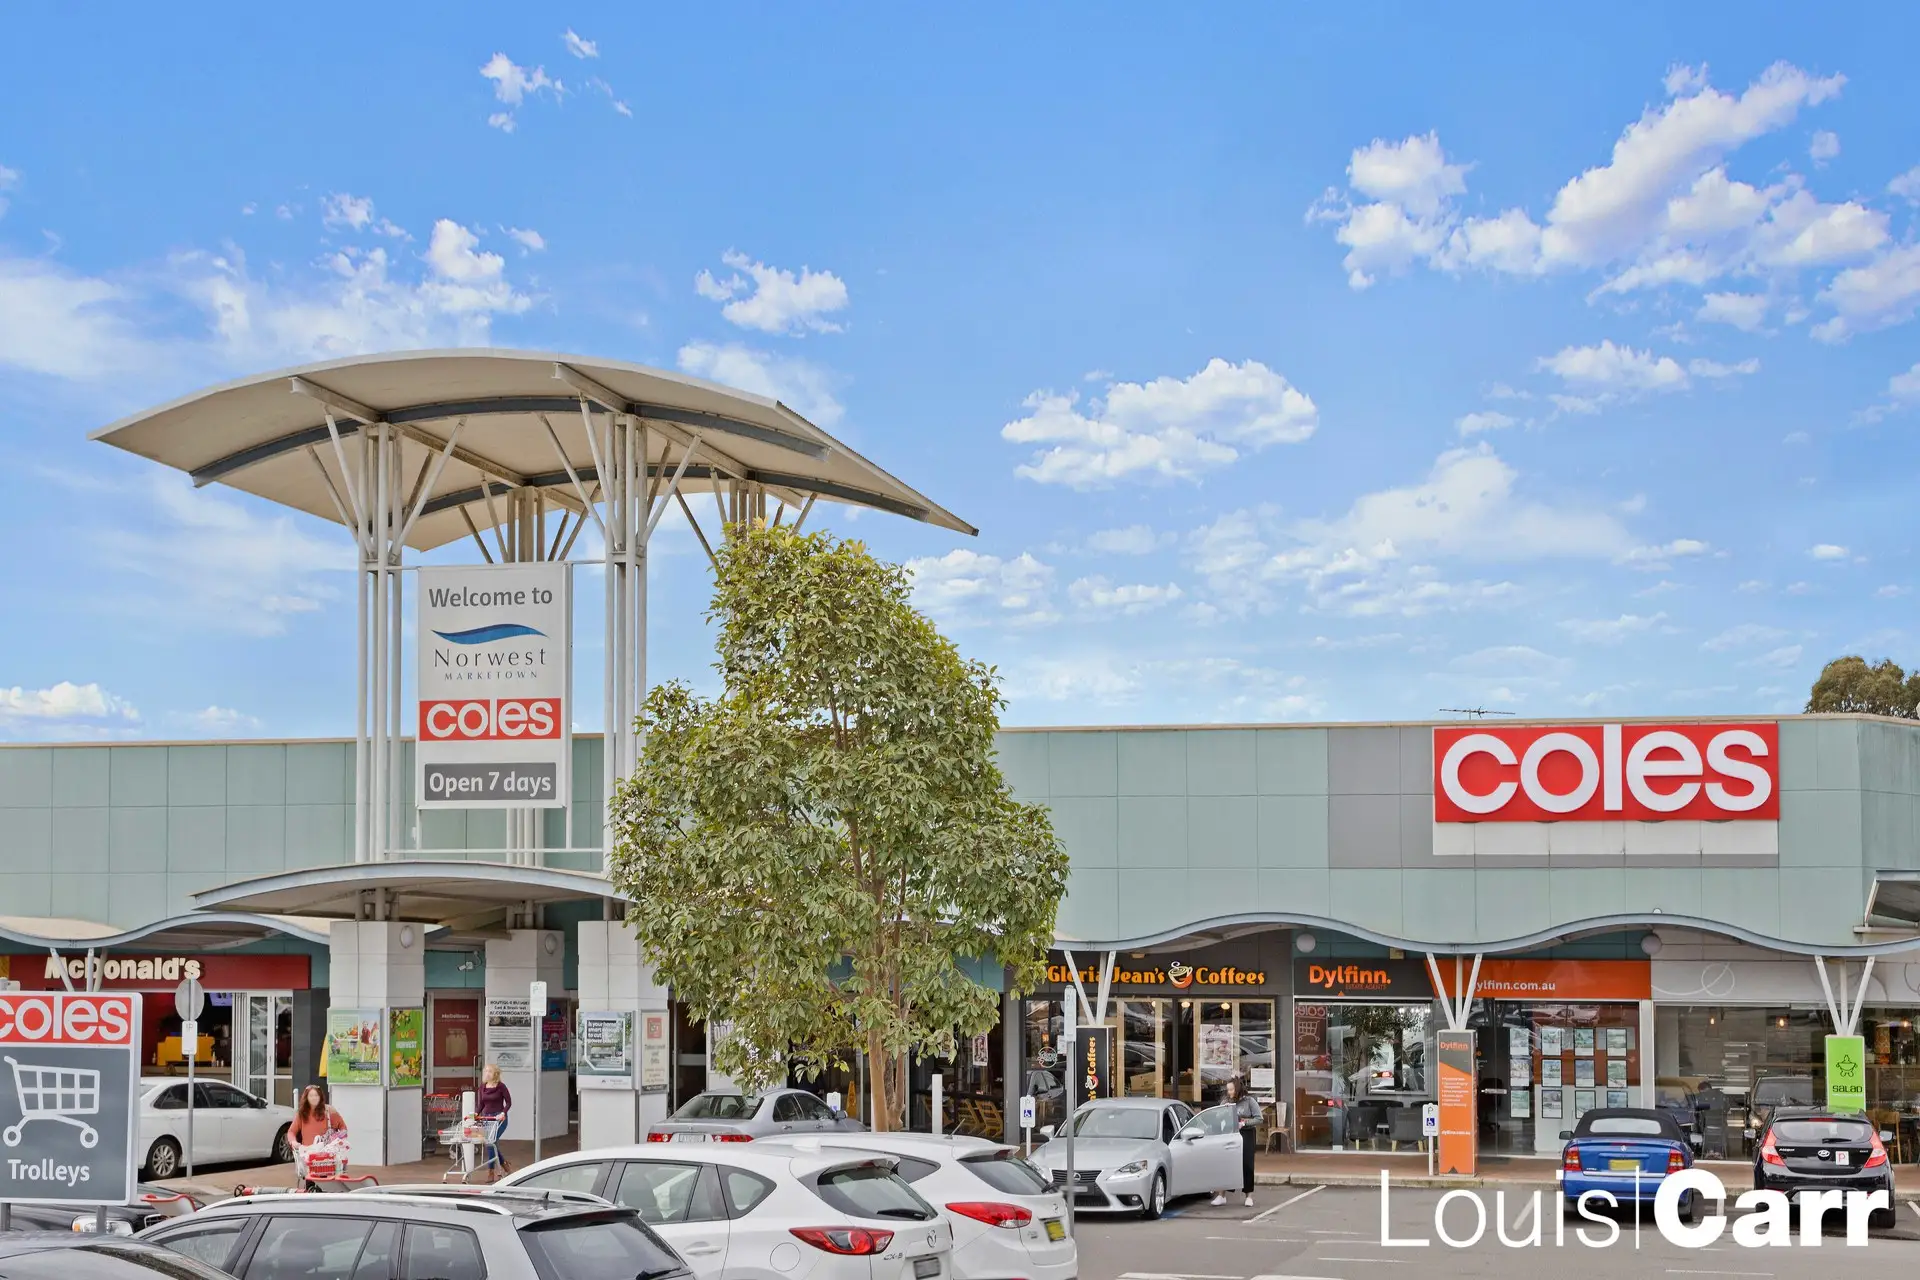 75/38 Solent Circuit, Norwest Sold by Louis Carr Real Estate - image 1